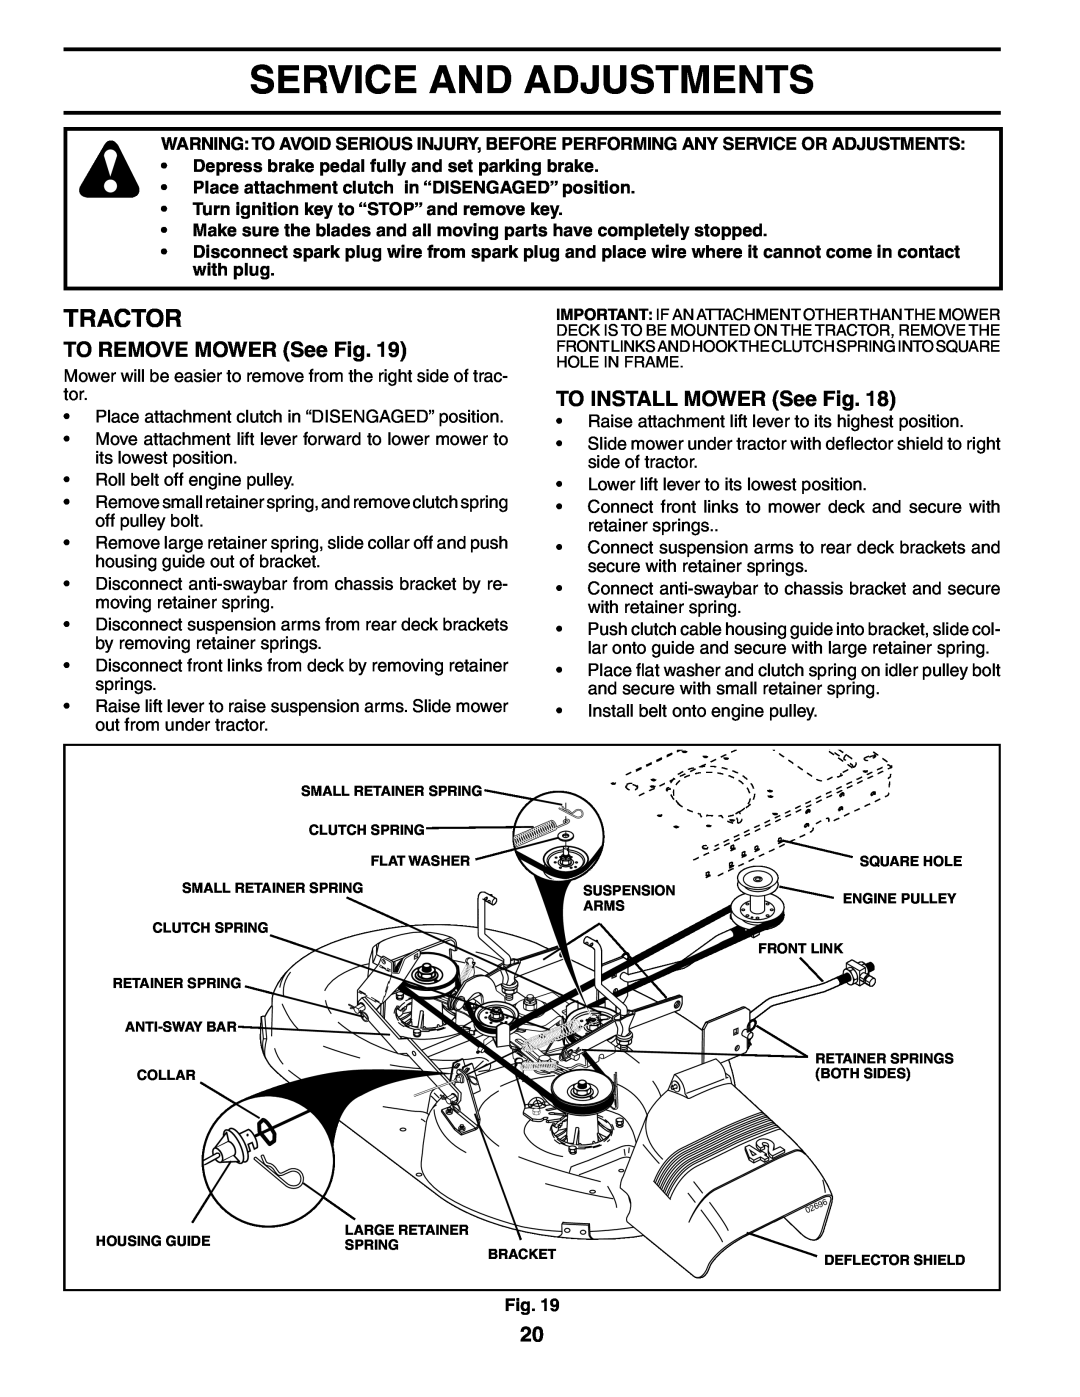 Poulan 954570925, 186996 owner manual Service And Adjustments, TO REMOVE MOWER See Fig, TO INSTALL MOWER See Fig, Tractor 